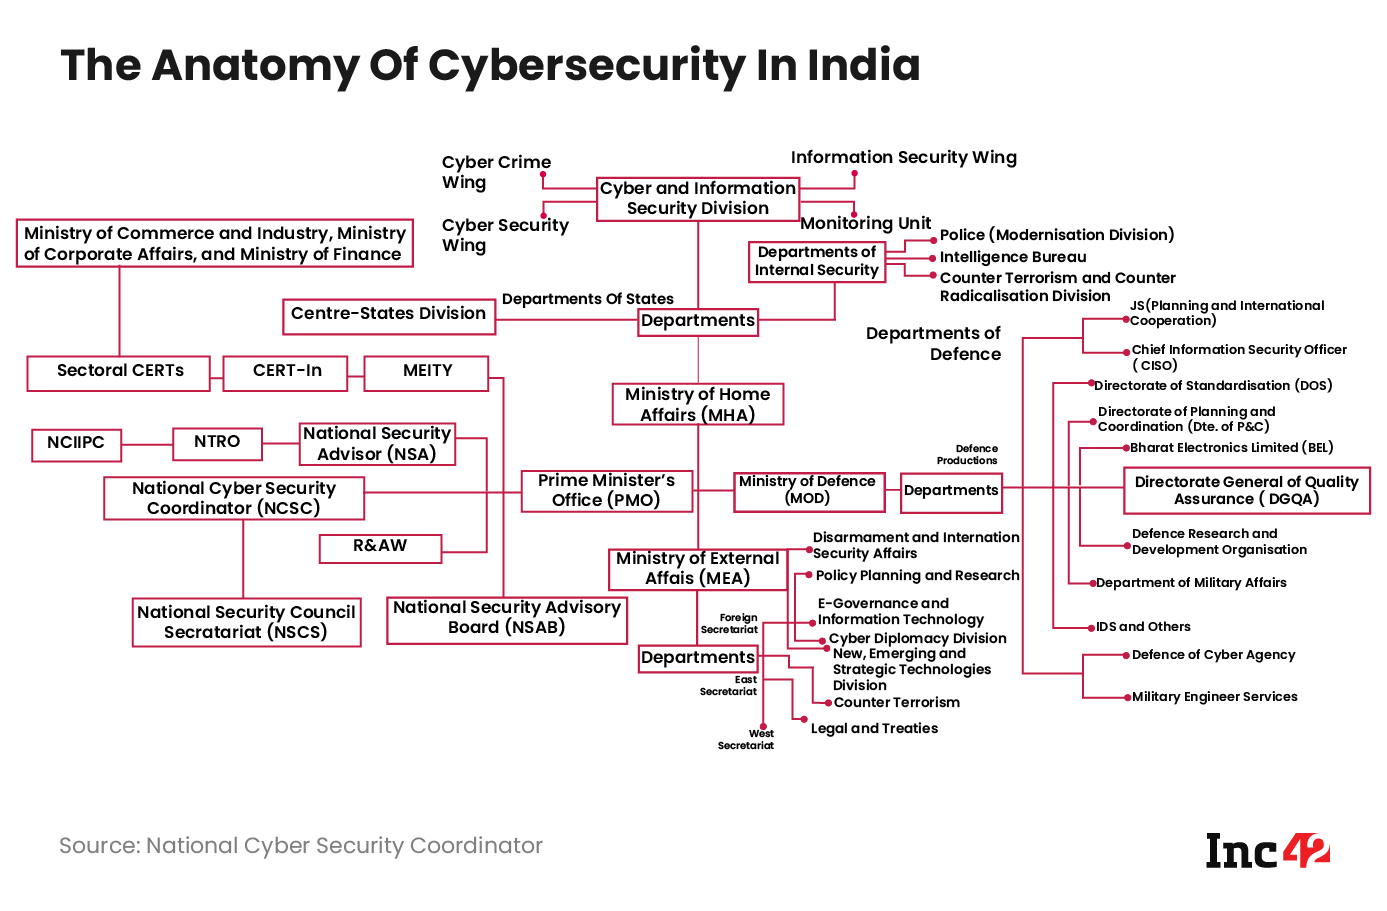 The Anatomy of Cybersecurity in India